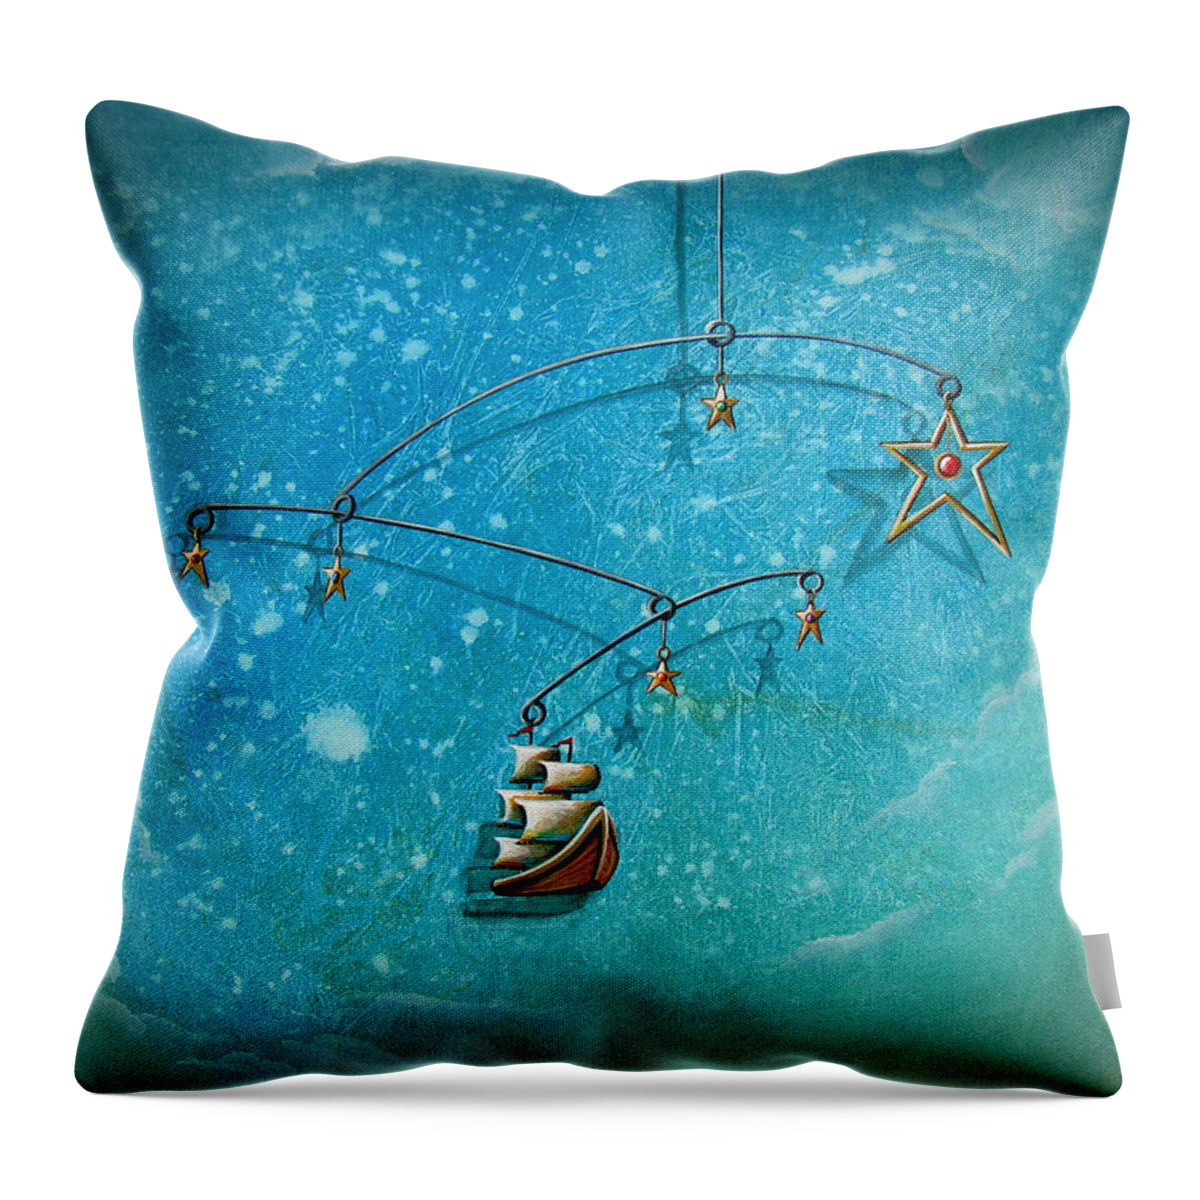 Boat Throw Pillow featuring the painting Treasure Hunter by Cindy Thornton